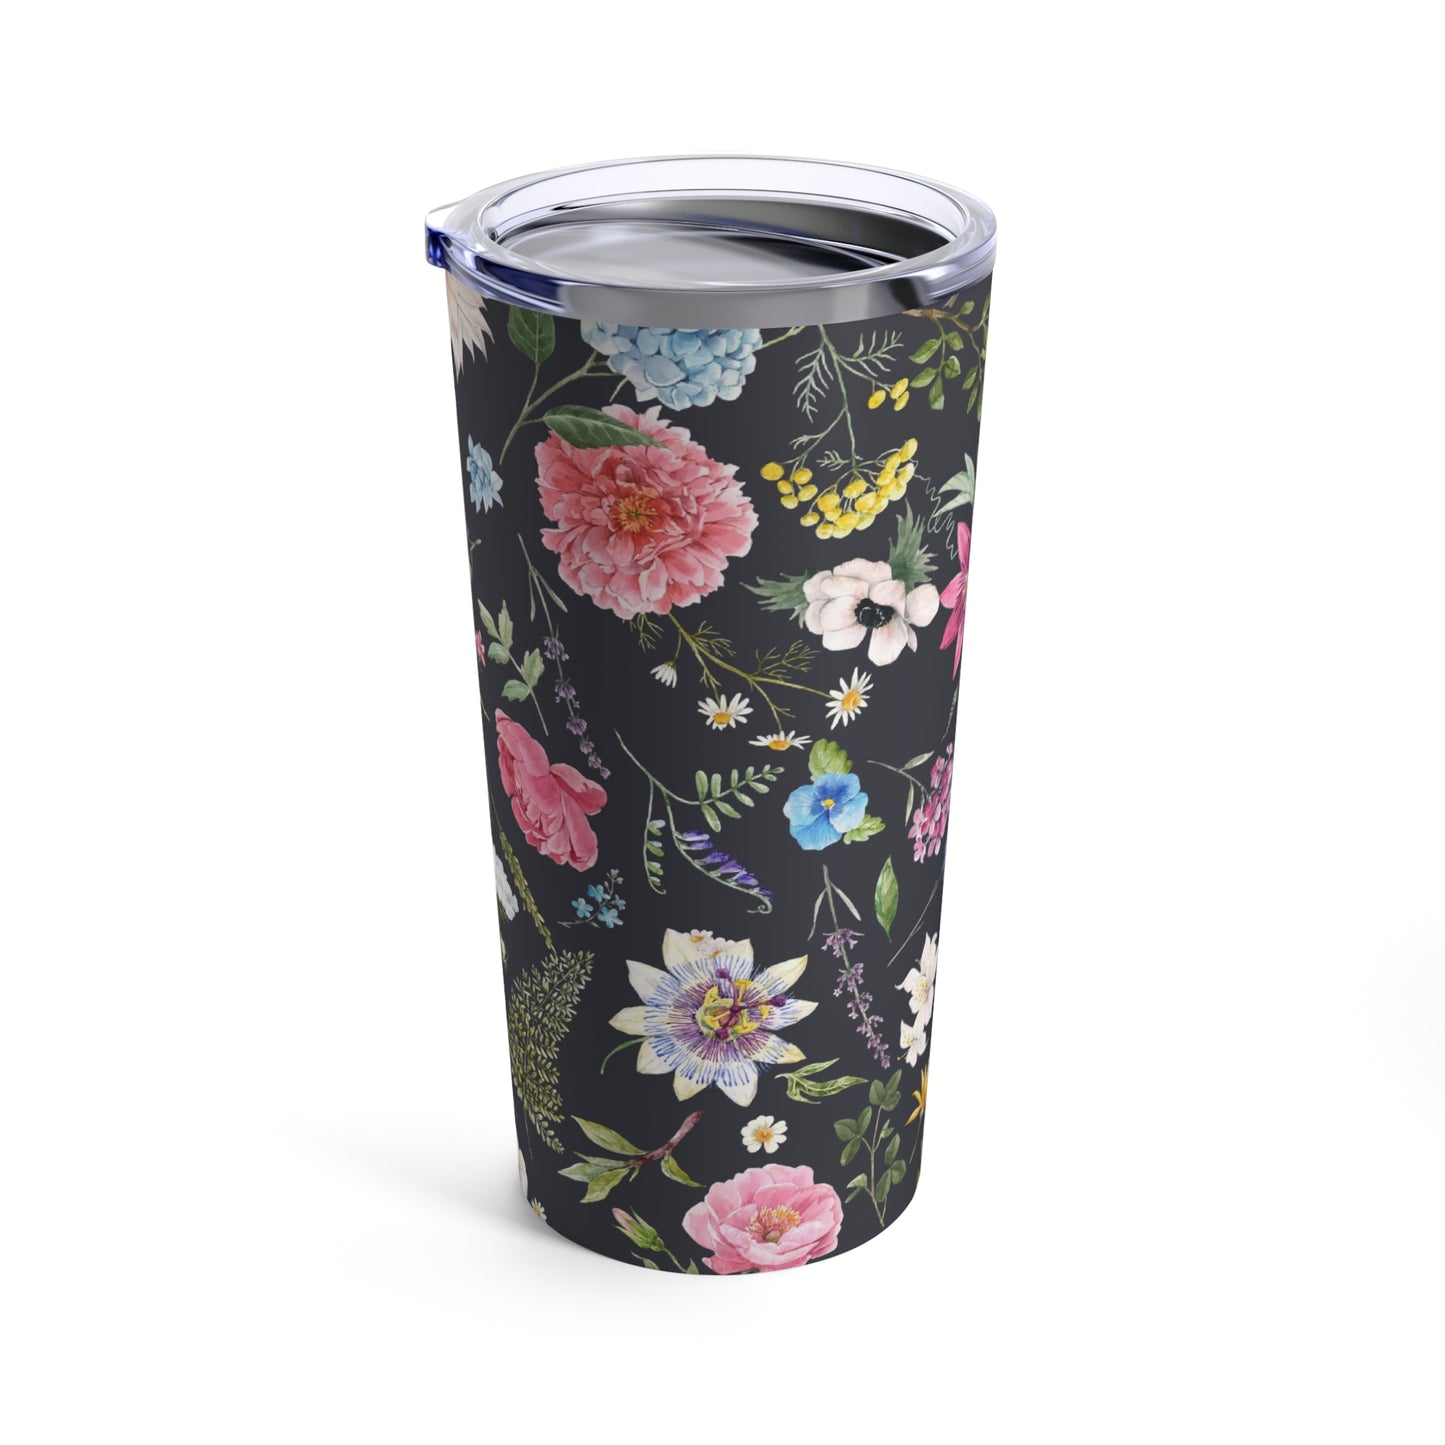 A black and white Printify Flower Garden Tumbler: 20 oz., stainless steel; insulated cup with a lid.